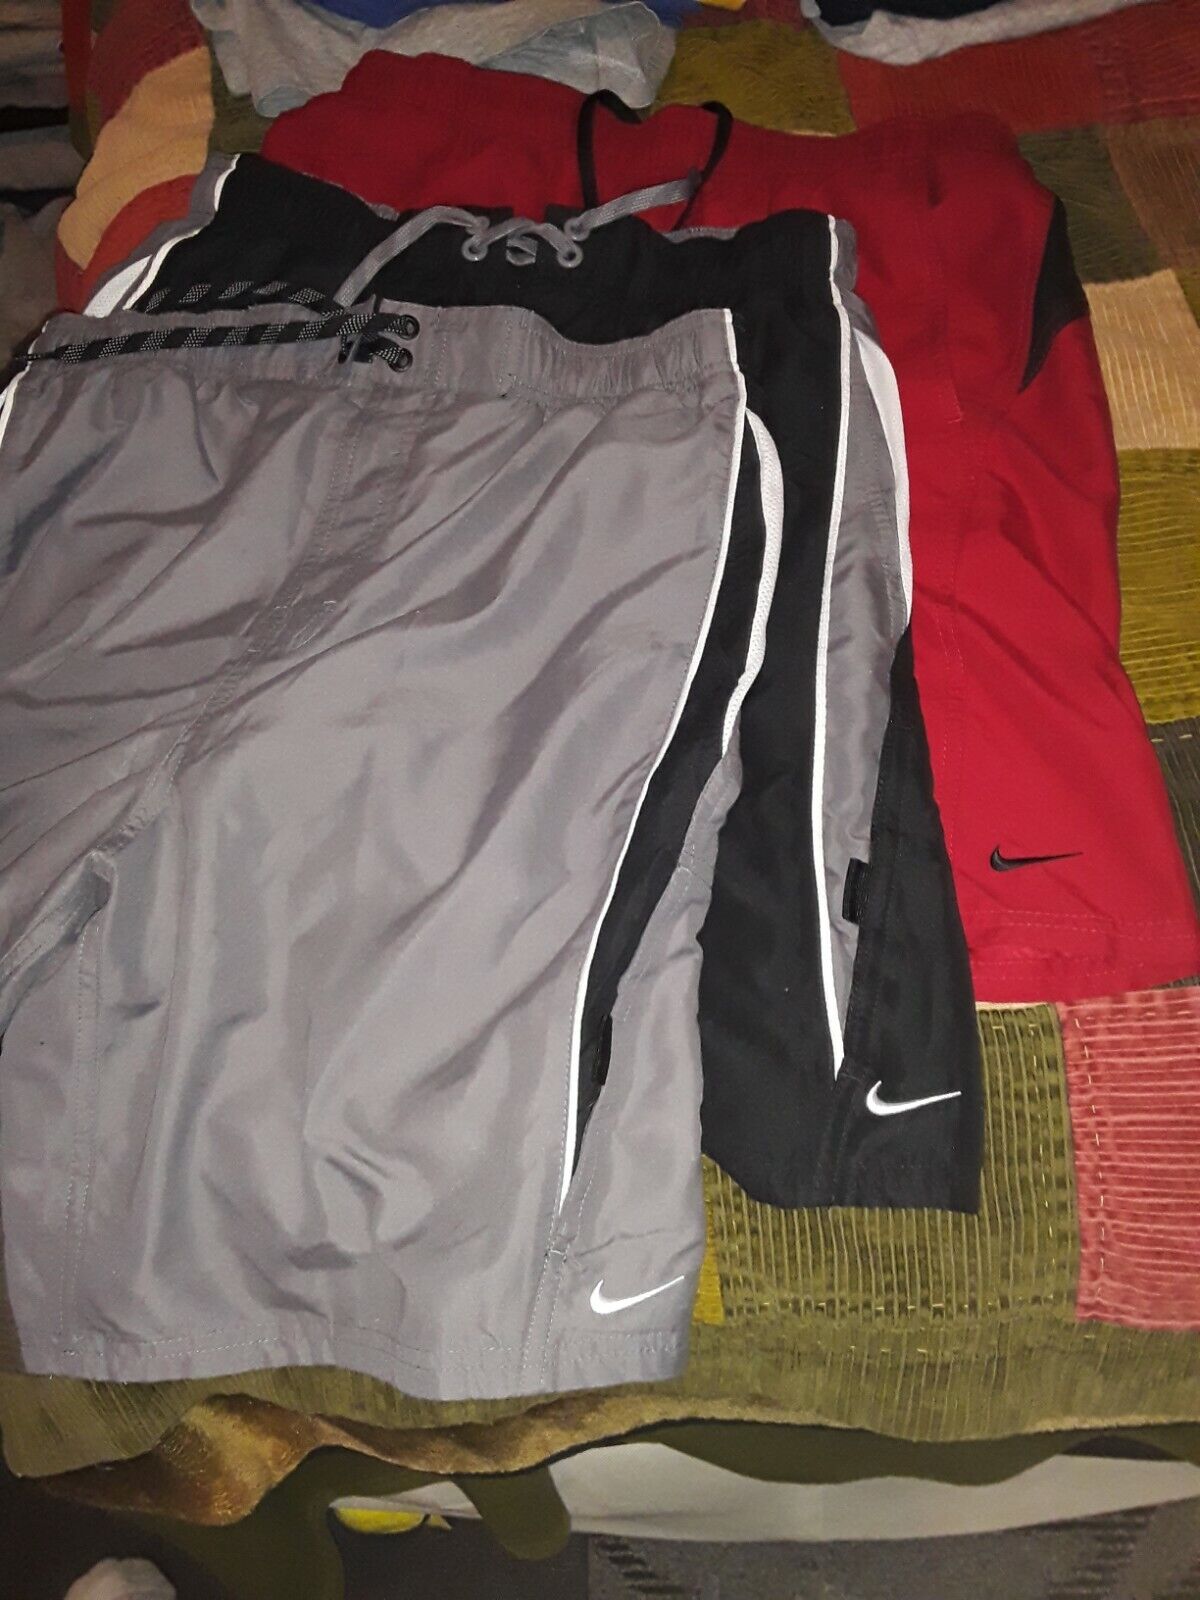 Outlet ☆ Free Shipping 3 Pairs Of Nike Shorts. Medium Ranking TOP7 Size Mens.